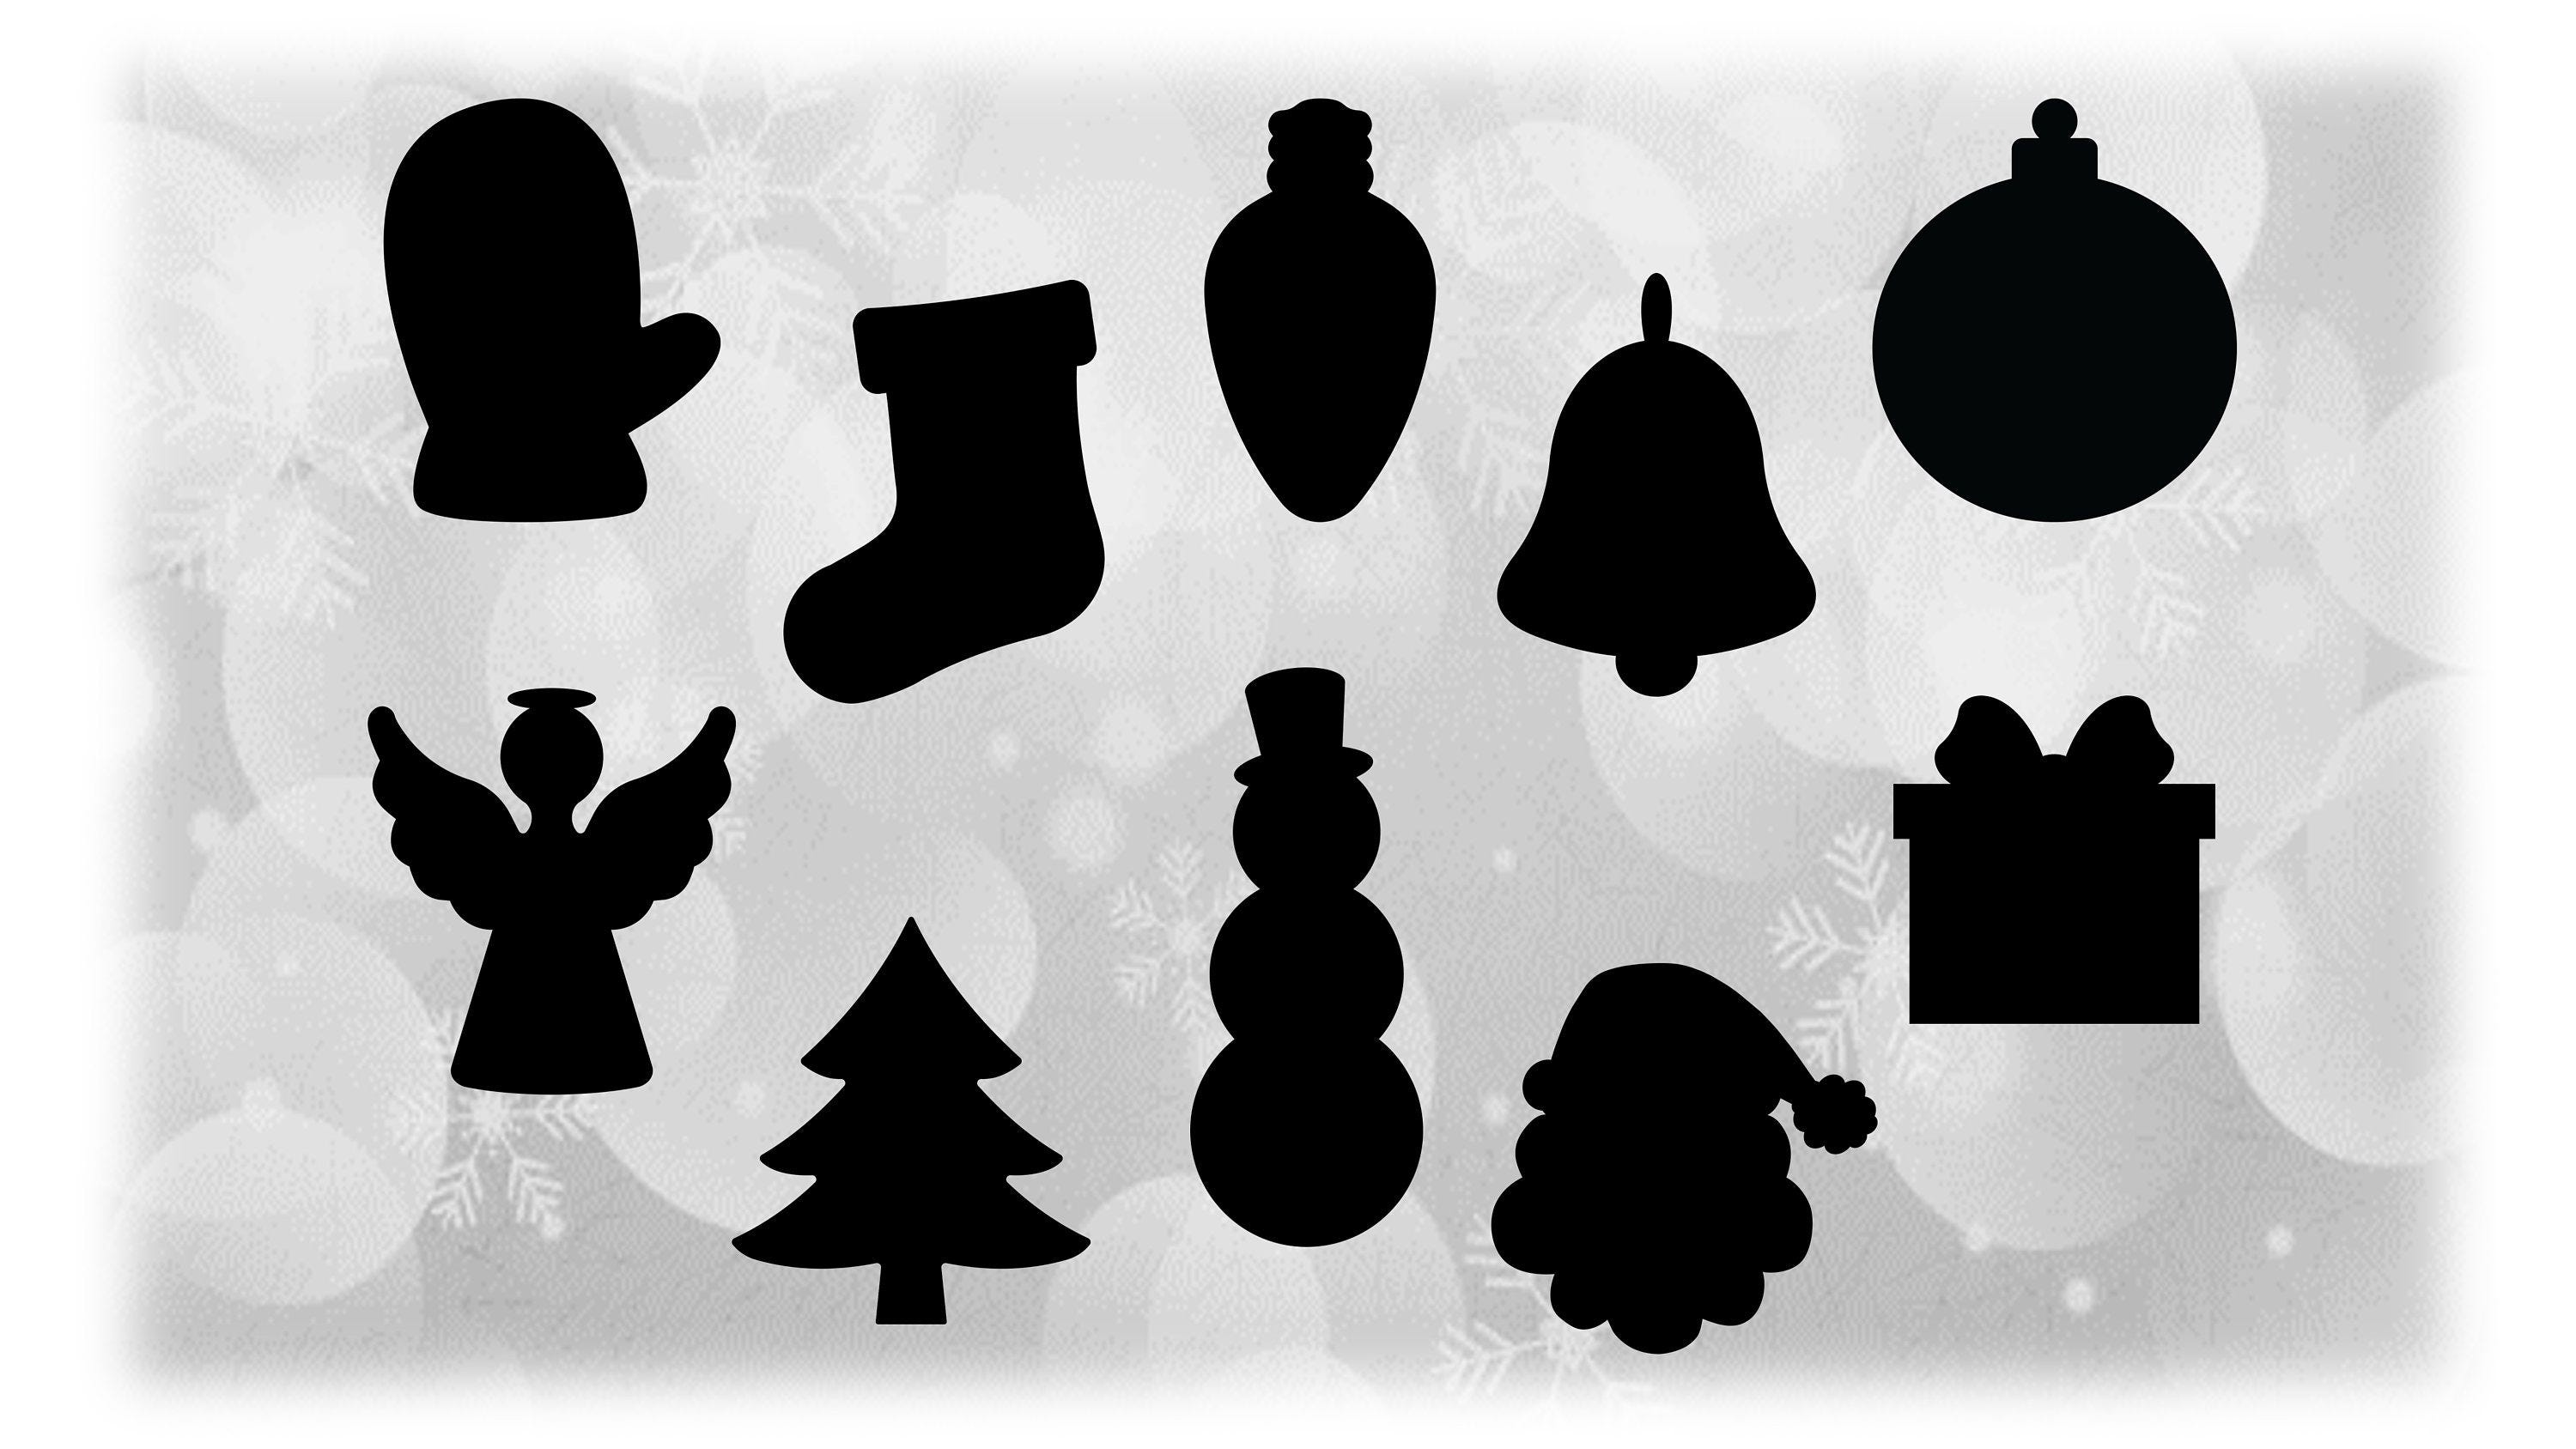 Holiday Clipart Value Pack Bundle: 10 Simple Christmas Theme Silhouettes for Ornaments, Gift Tags, Keychains - Digital Download SVG & PNG